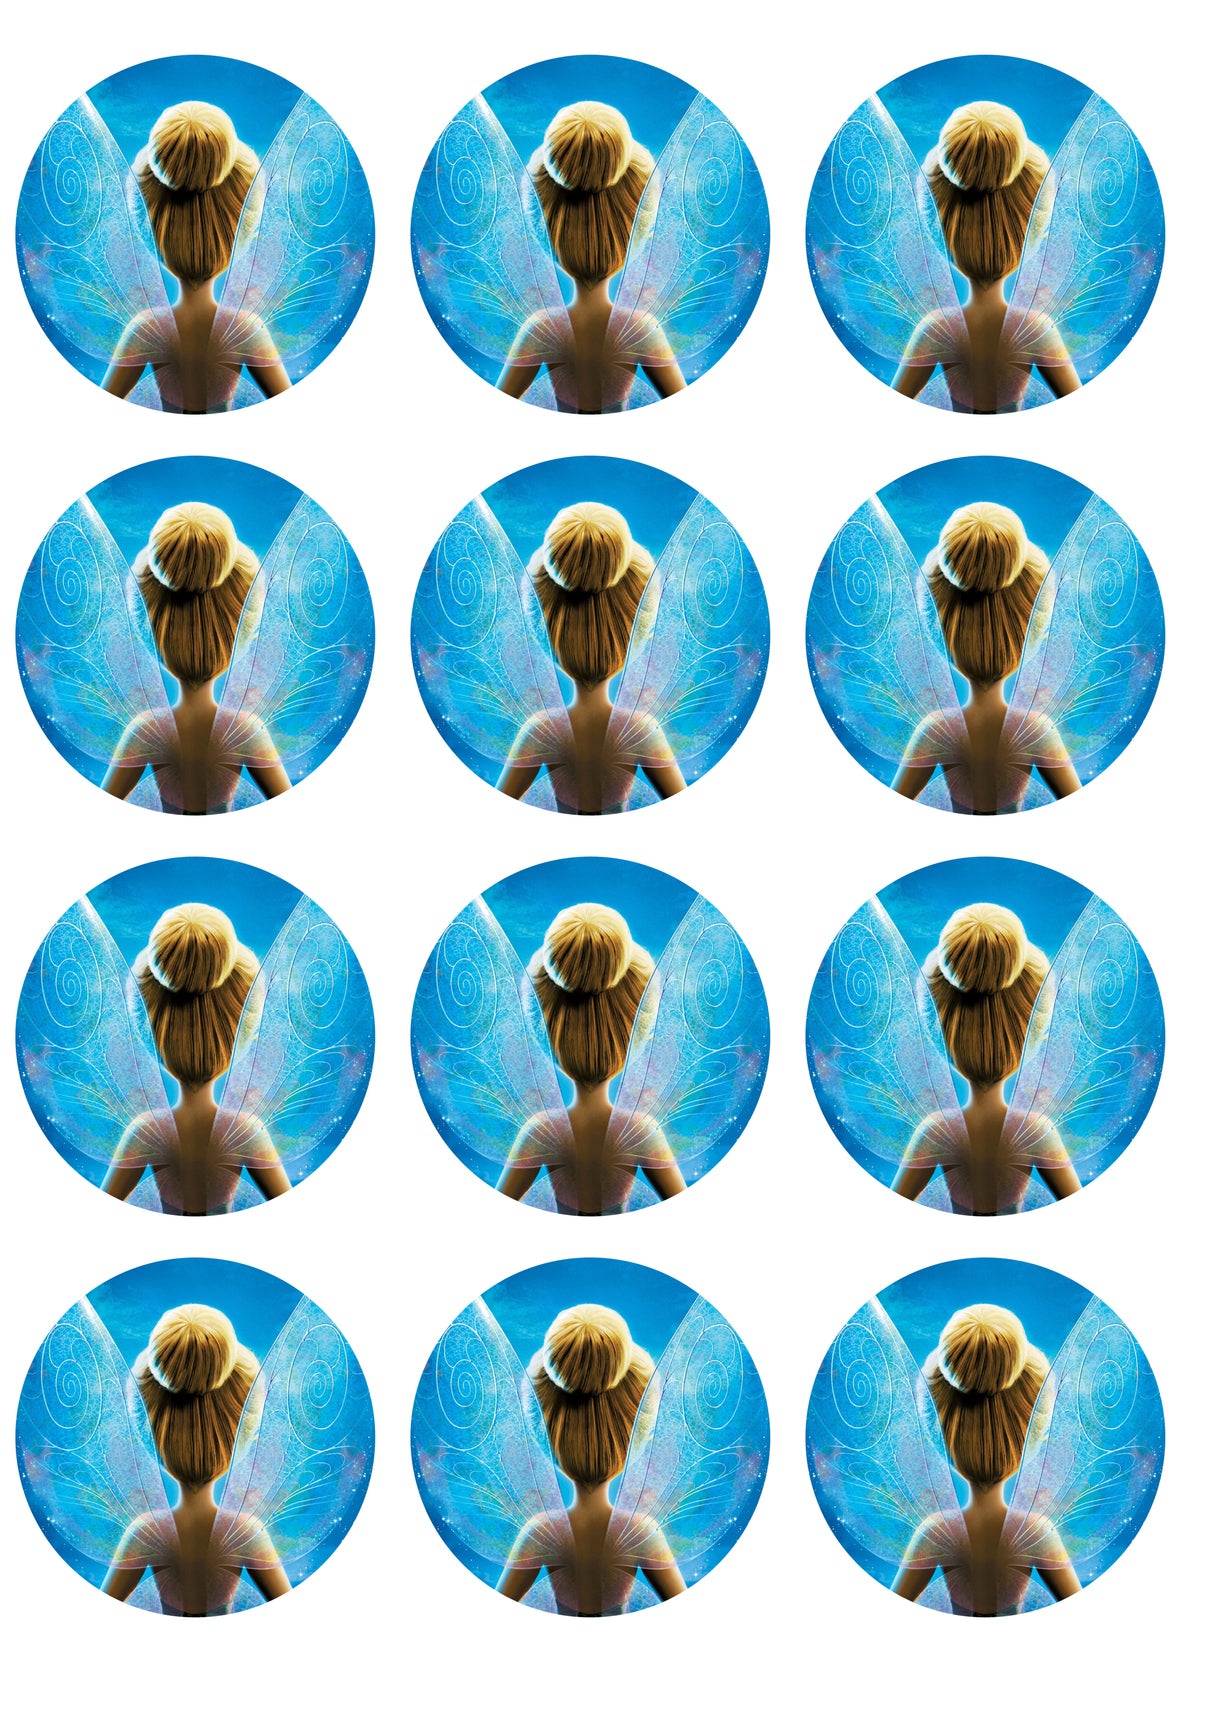 Disney Tinker Bell Peter Pan Fairy Wings Edible Cupcake Topper Images ABPID14857